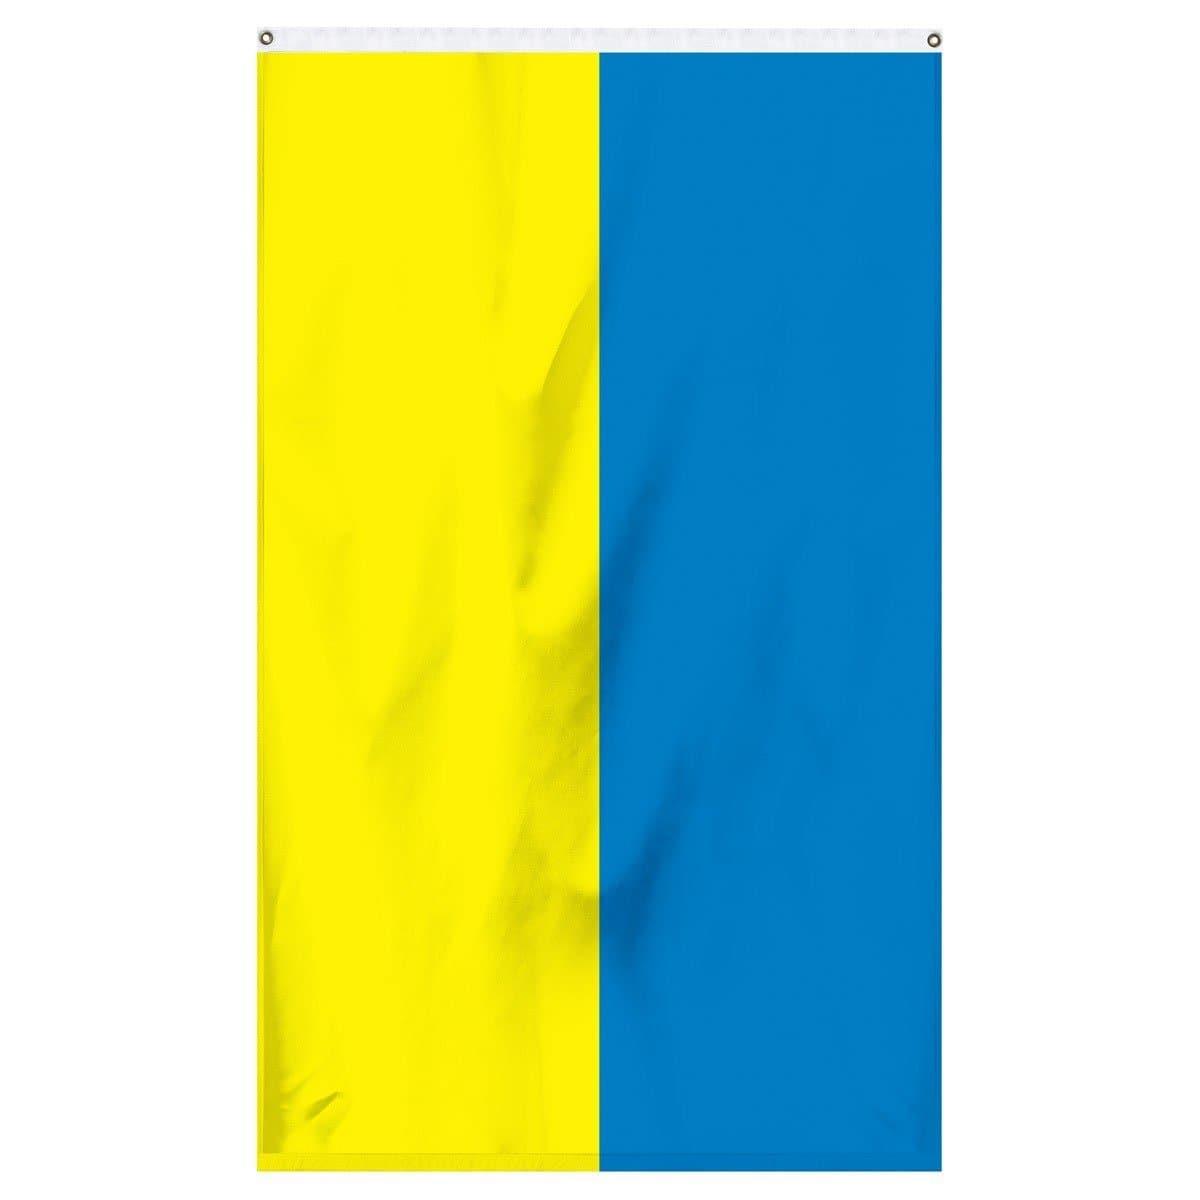 Ukraine National Flag for sale to buy online from Atlantic Flagpole. Blue and yellow stripped flag.